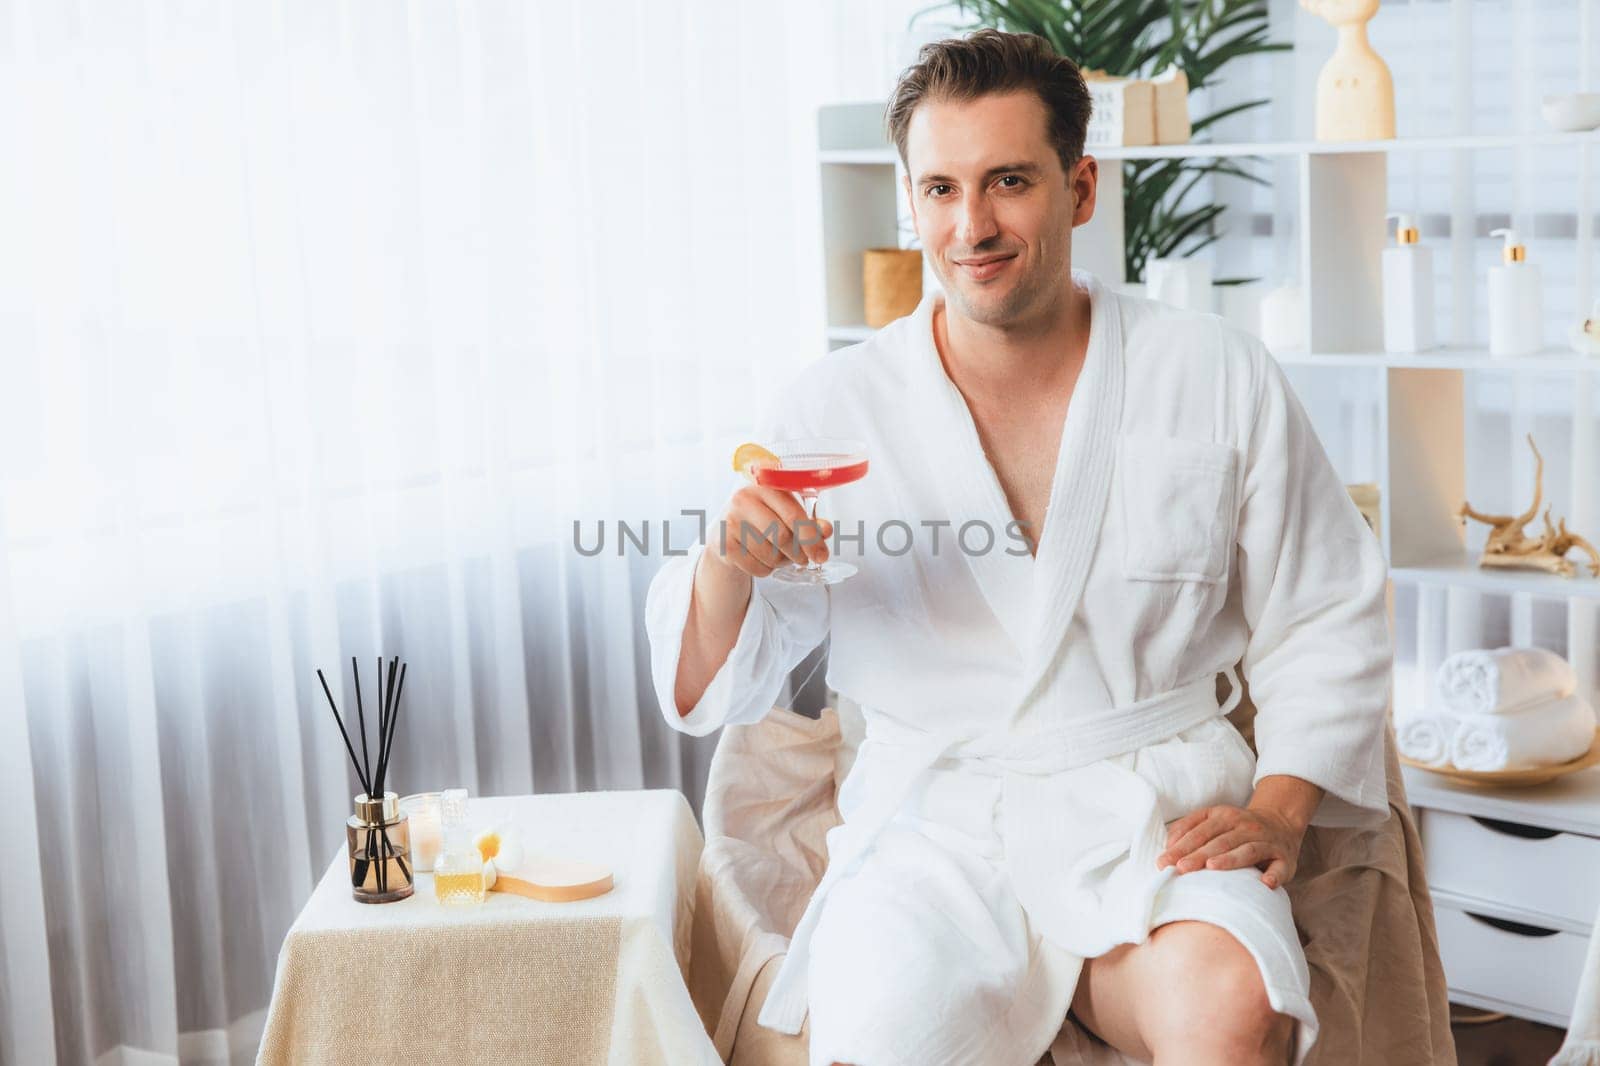 Beauty or body treatment spa salon vacation lifestyle concept with man wearing bathrobe relaxing with drinks in luxurious hotel spa or resort room. Vacation and leisure relaxation. Quiescent